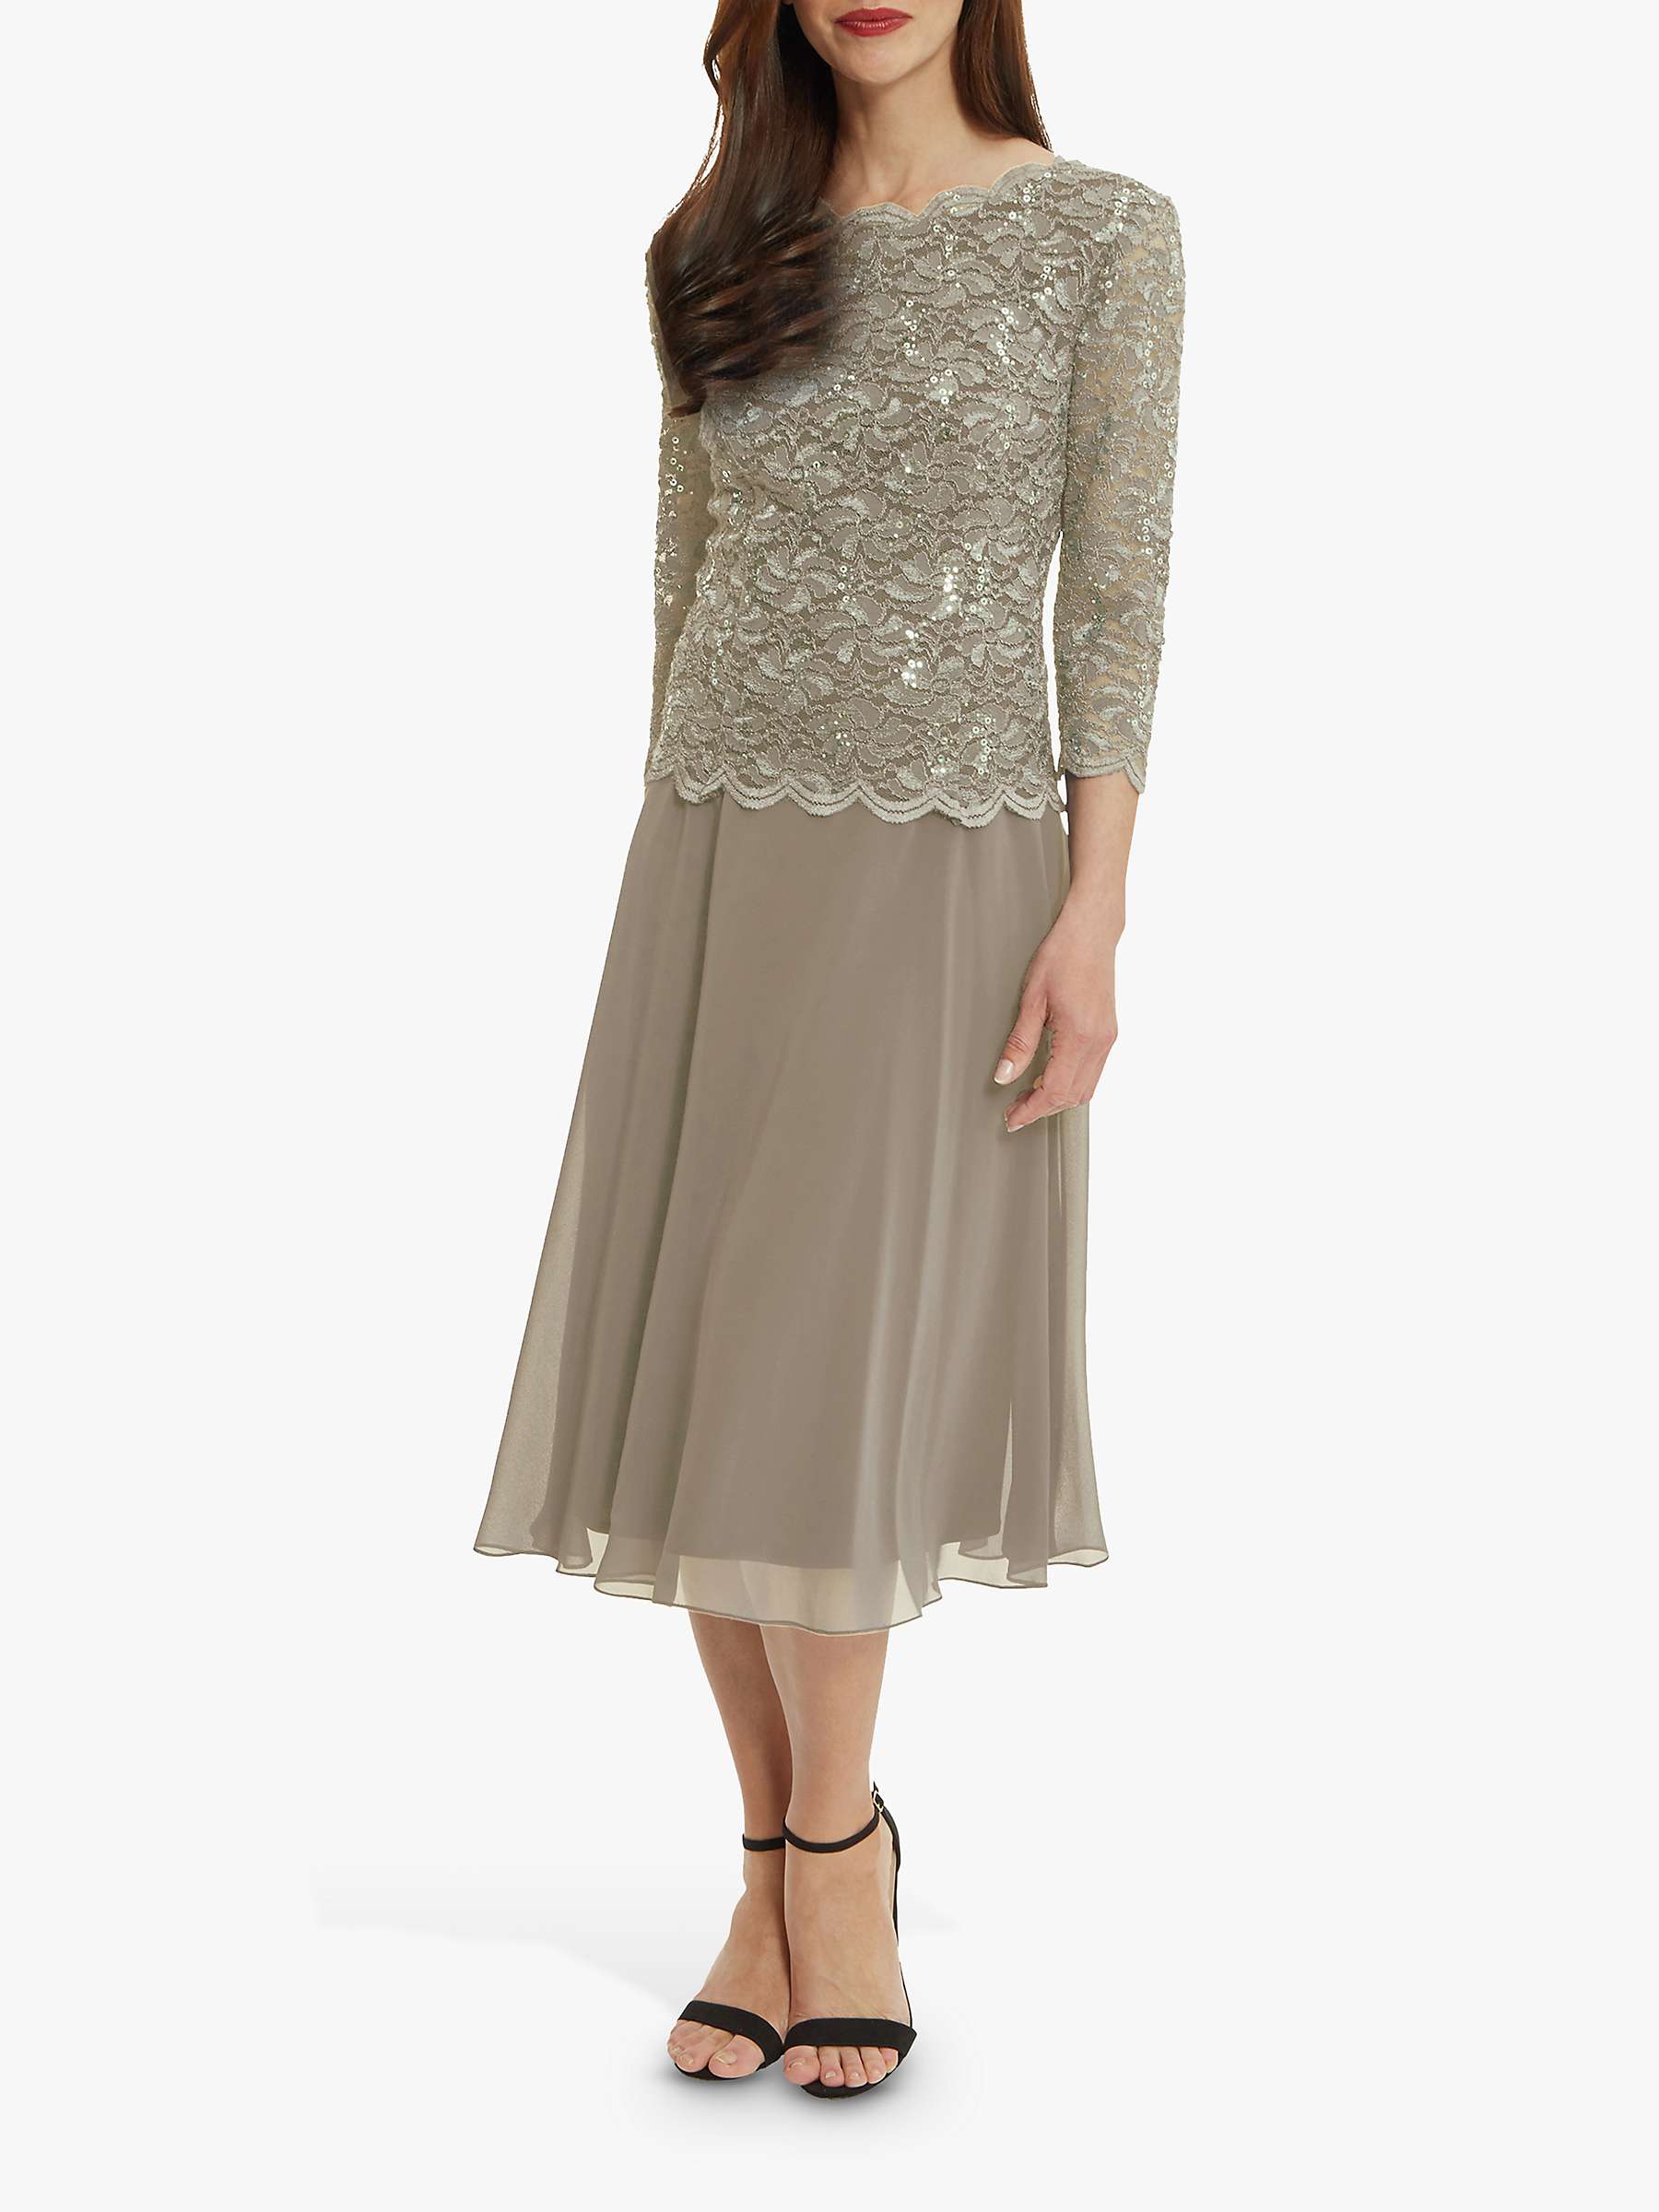 Buy Gina Bacconi Albany Lace Dress Online at johnlewis.com